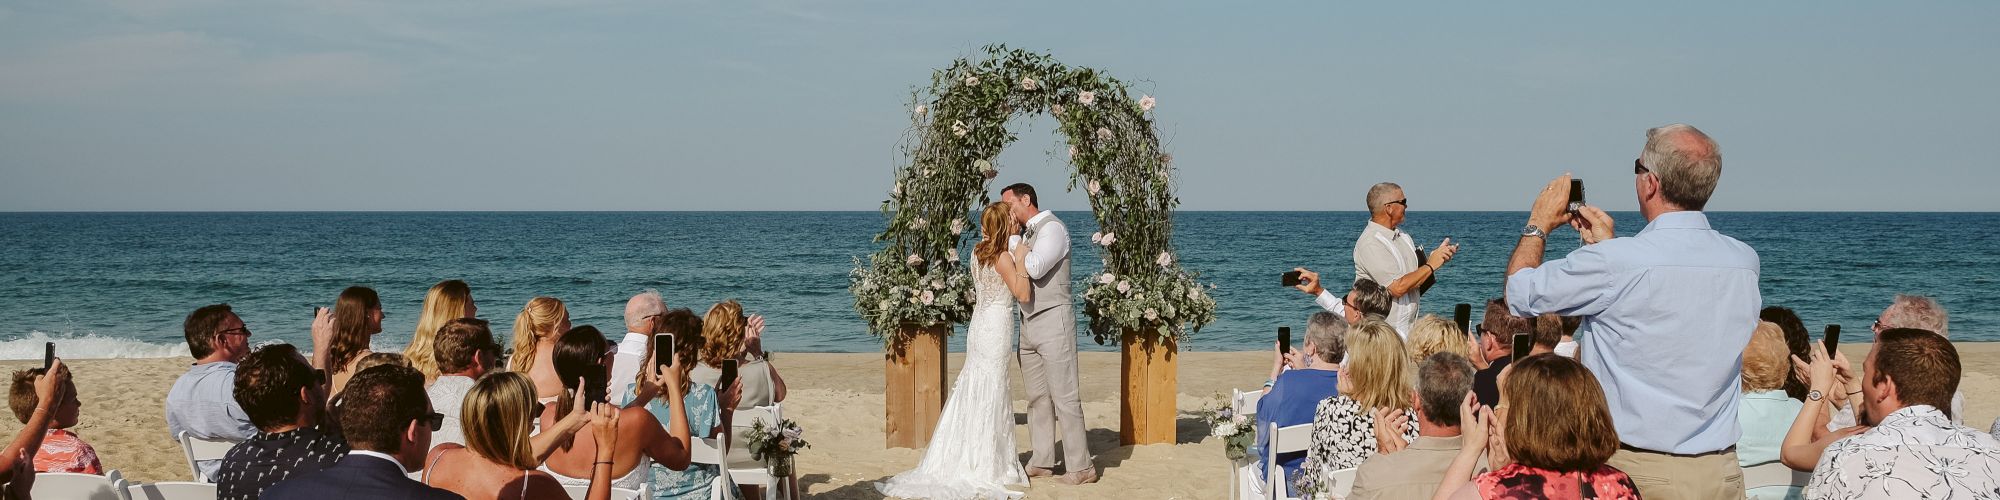 A couple is having a beach wedding ceremony, standing under a floral arch, surrounded by guests seated on white chairs, with the ocean in the background.